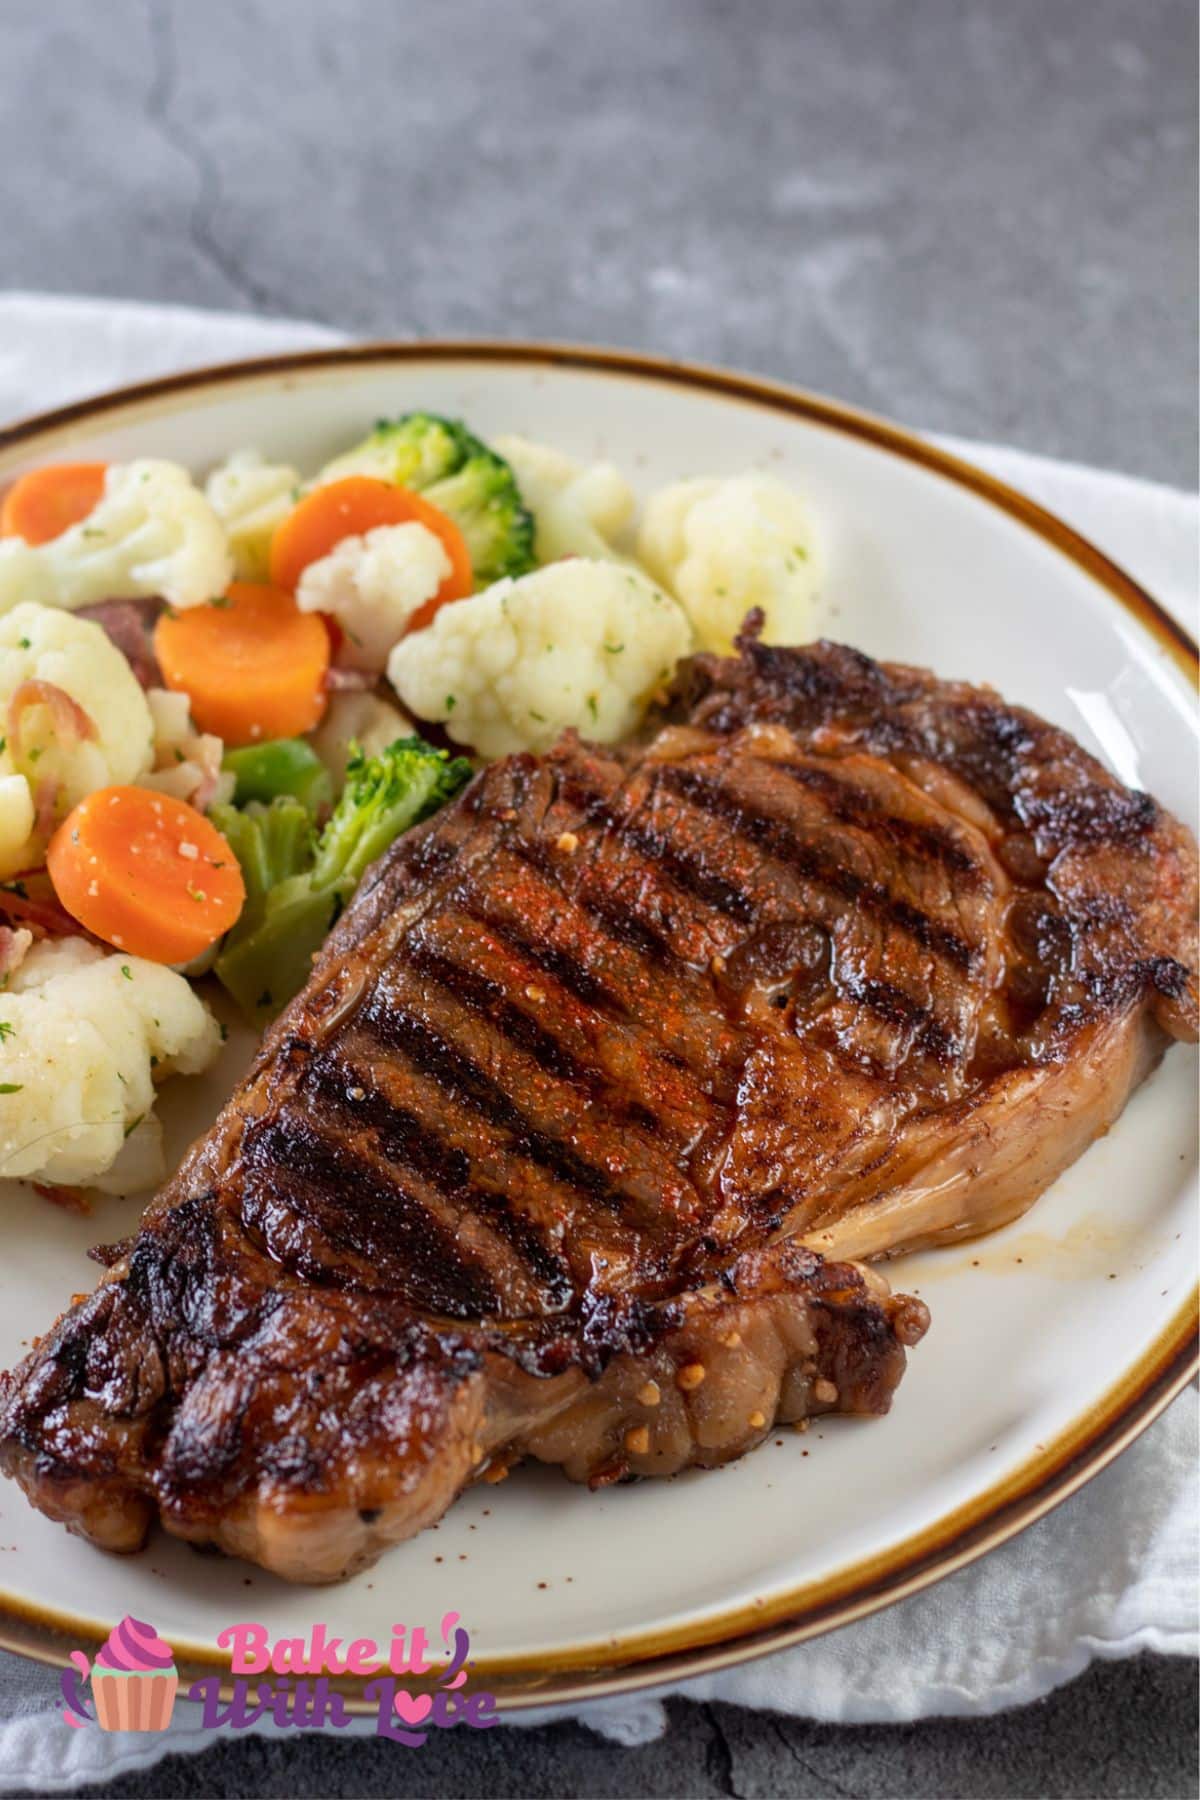 Tender grilled ribeye with steak marinade served on tan plate with veggie blend.